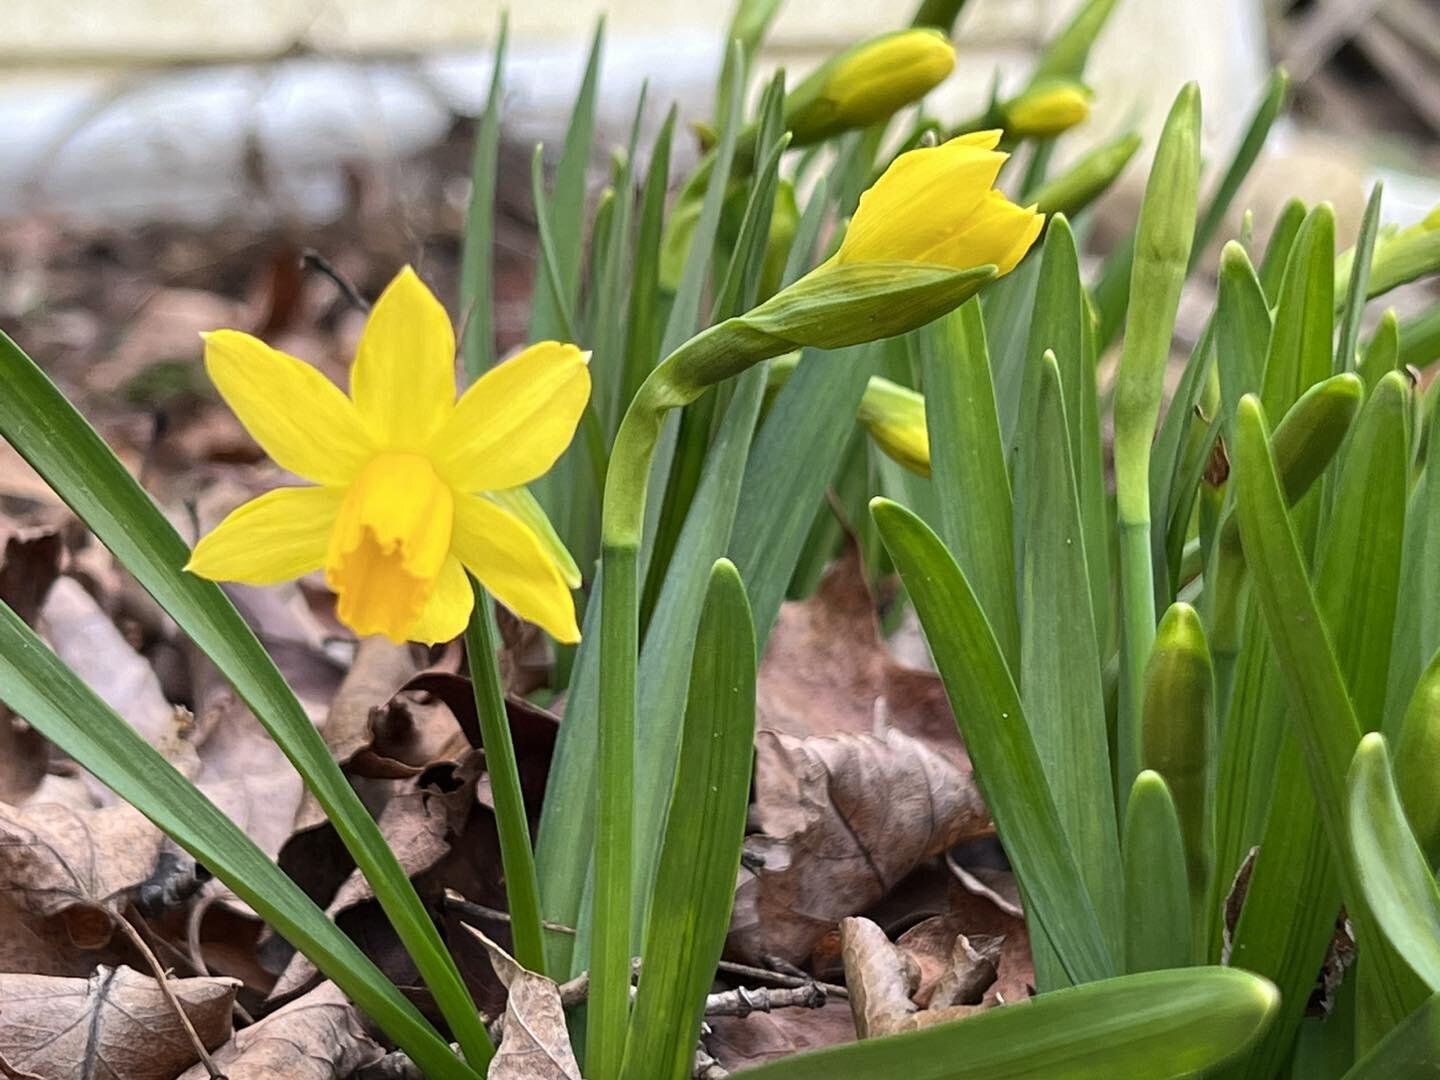 Silly daffodils, it may be almost 70 degrees today but it&rsquo;ll likely snow in the morning. 
.
.
.
.
.
#springweatheriscrazy #dancingbearinn #Damascus #damascusva #visitdamascusva #TheDancingBear #damascusvirginia